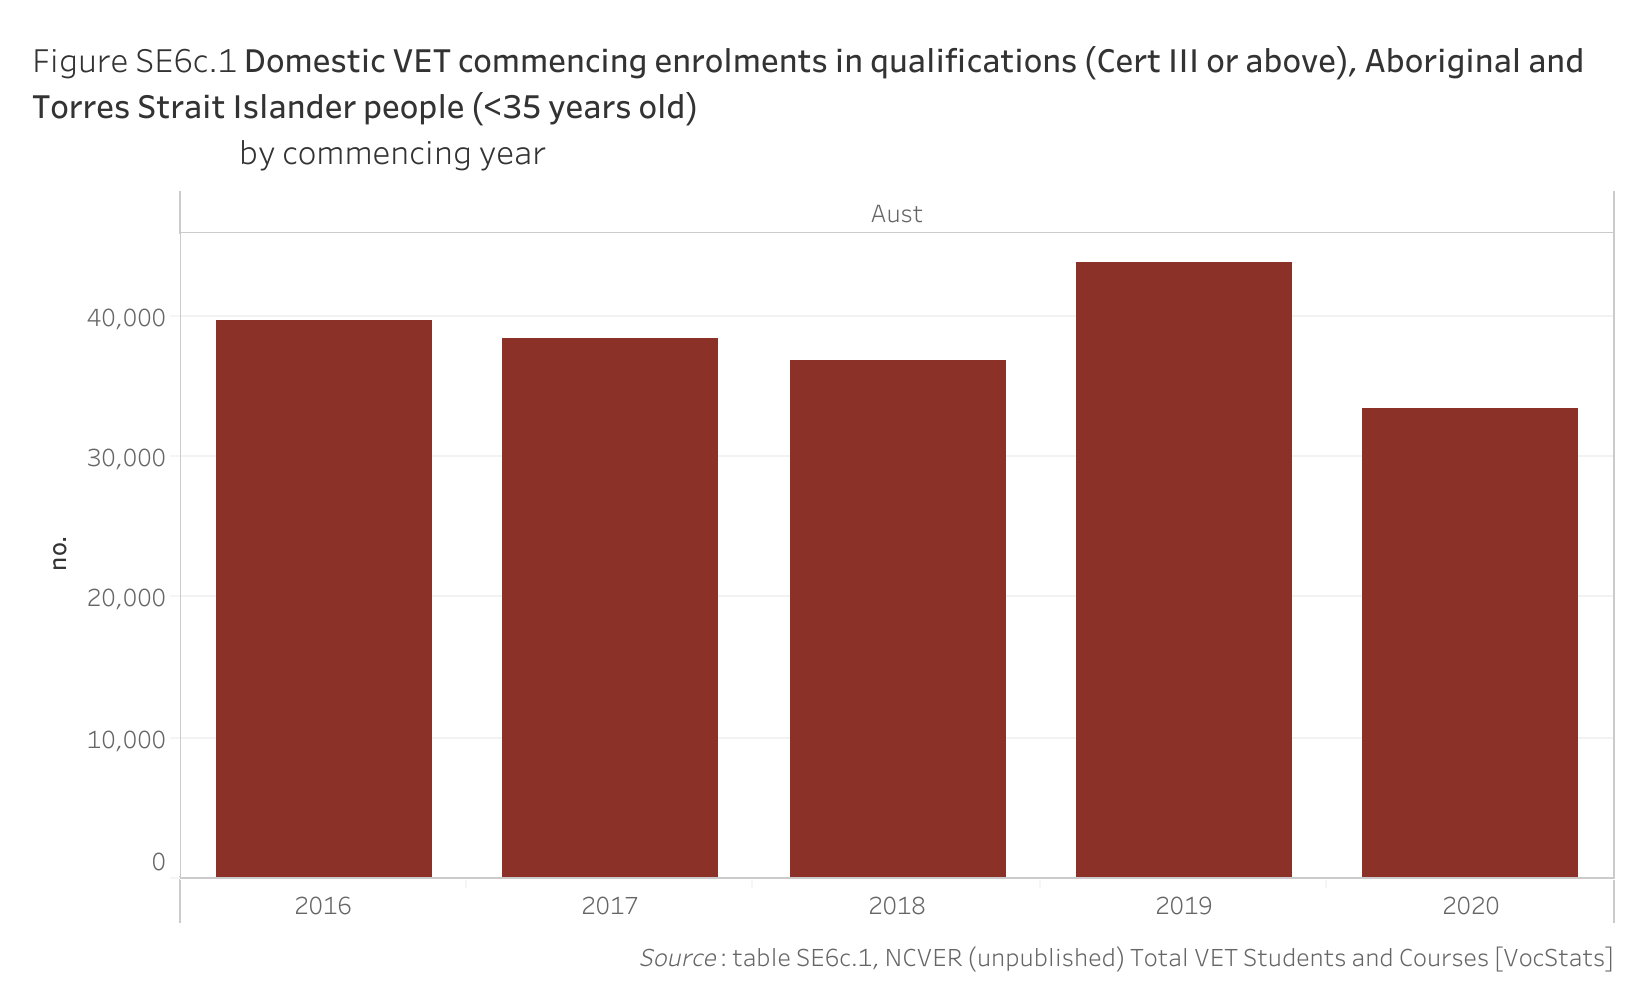 Figure SE6c.1. Bar chart showing the number of (<35 years old) domestic Vocational Education and Training (VET) commencing enrolments in qualifications (Cert III or above) by Aboriginal and Torres Strait Islander people in Australia, by commencing year. Data table of figure of SE6c.1 is below.